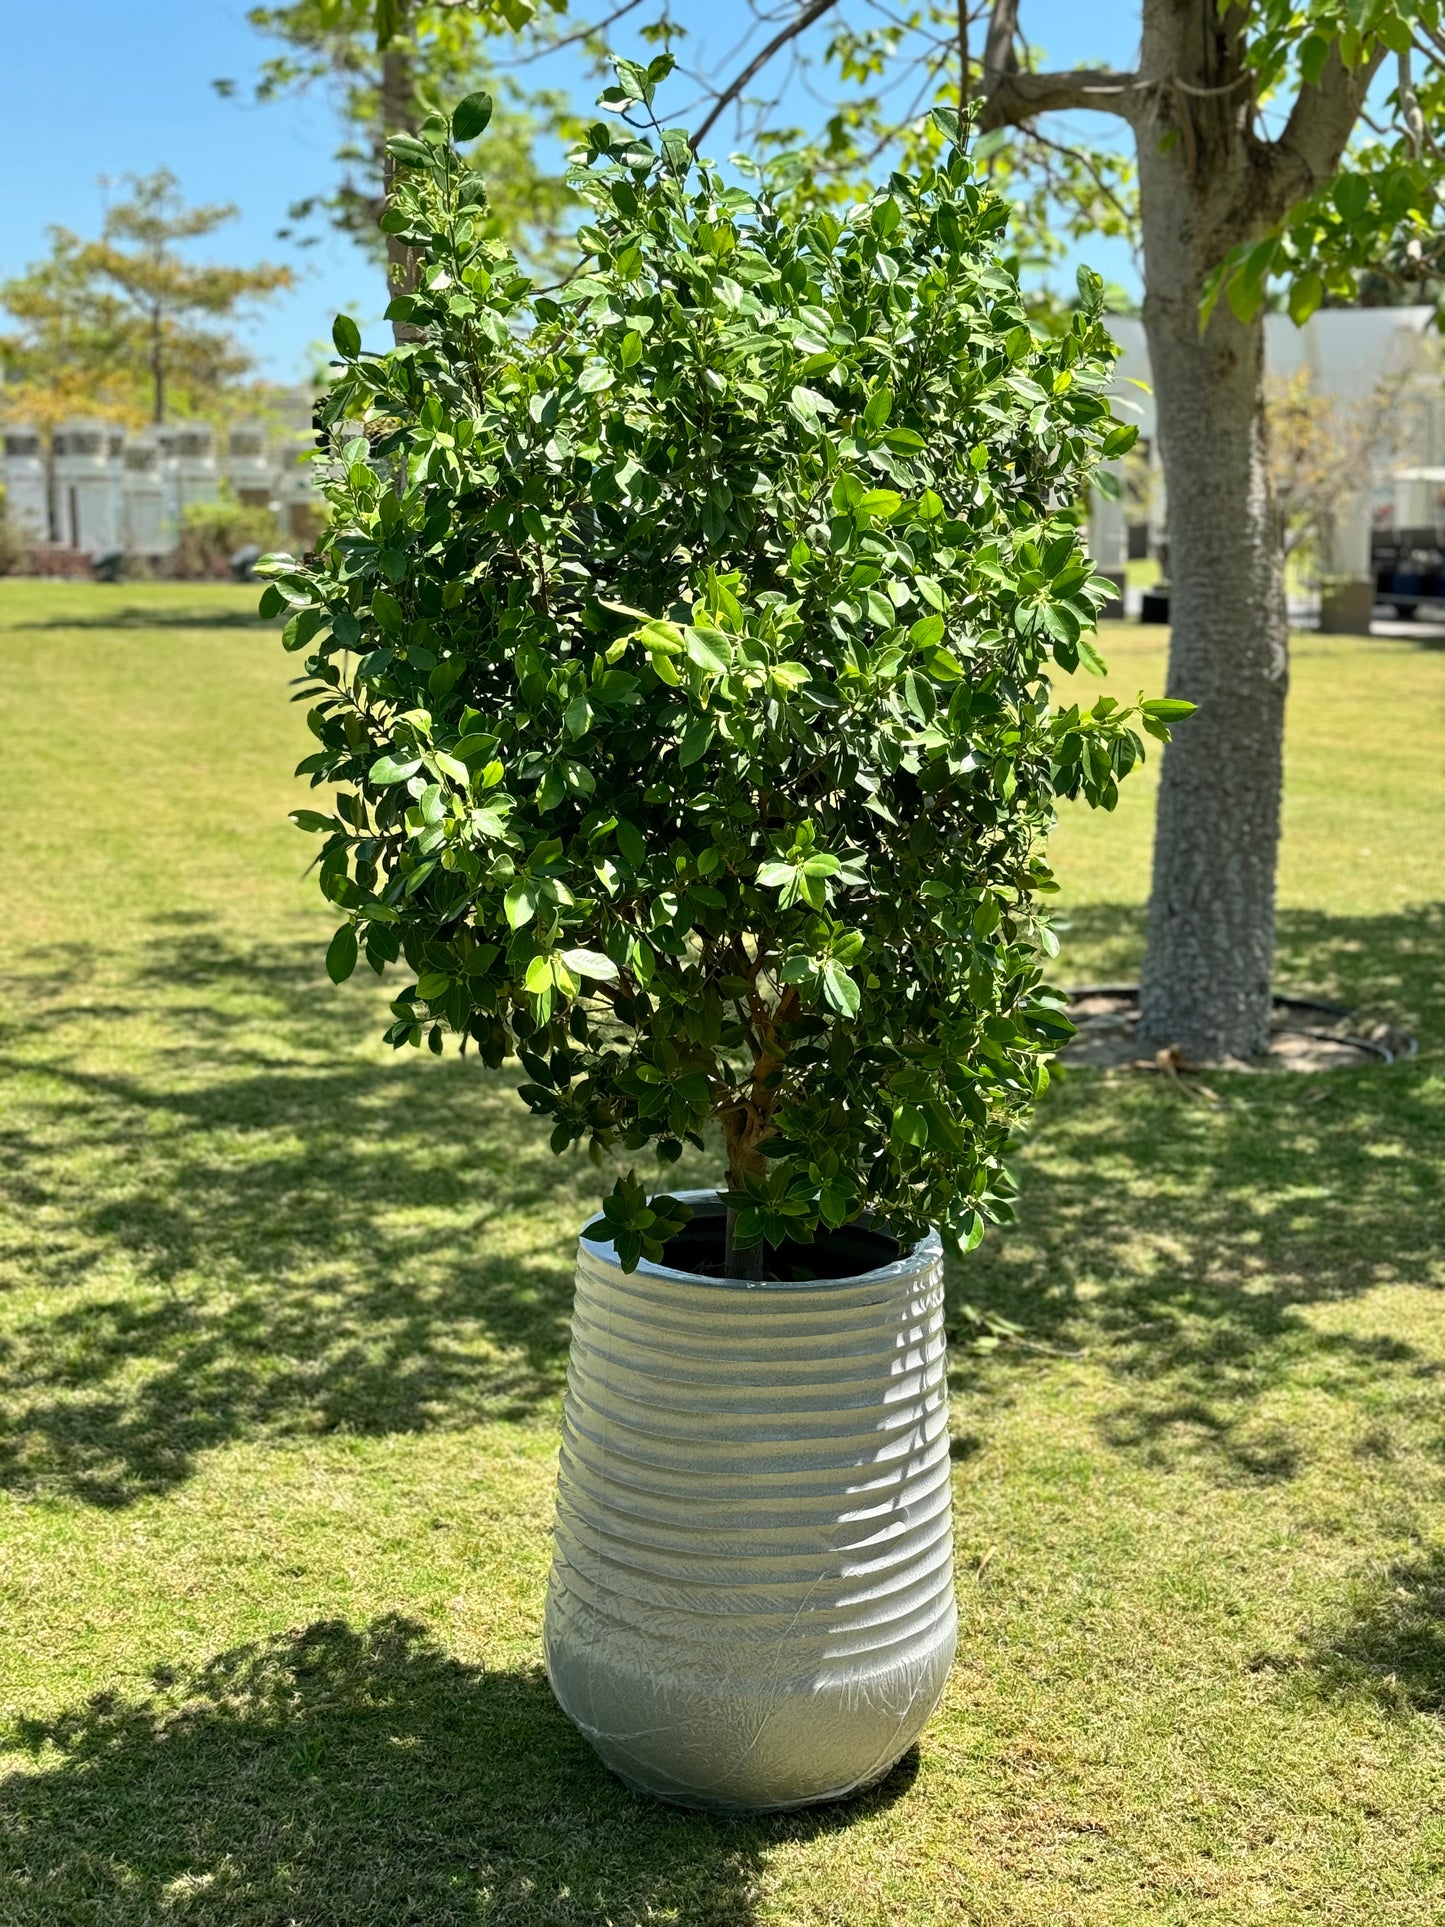 Ficus Nitida Tree - White Fiber Pot Edition - Natural Live Plants for sale in Kuwait